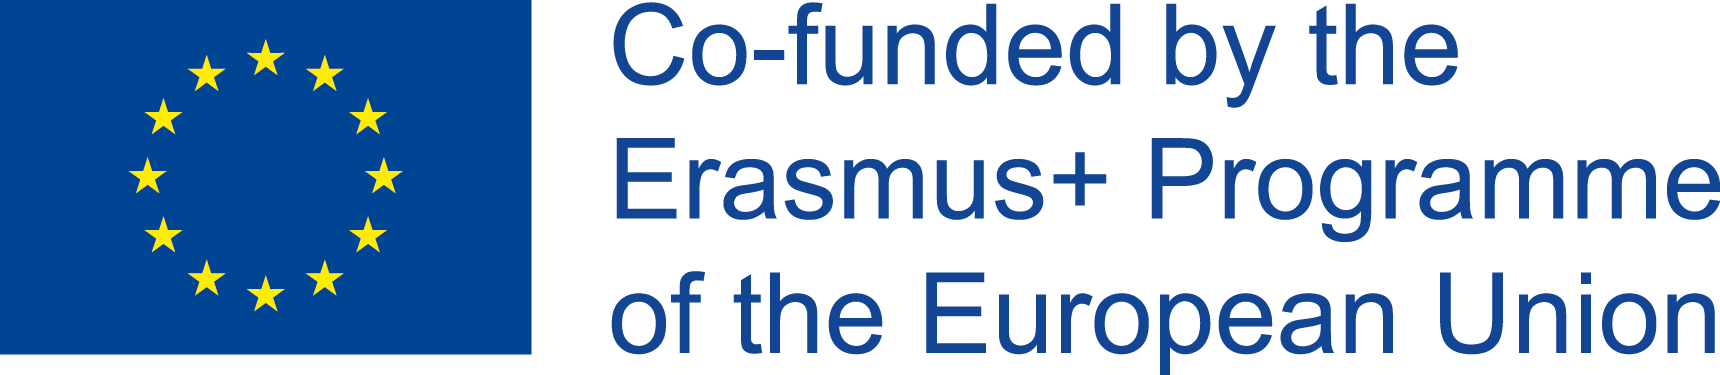 co-funded by the Erasmus+ Program of the European union